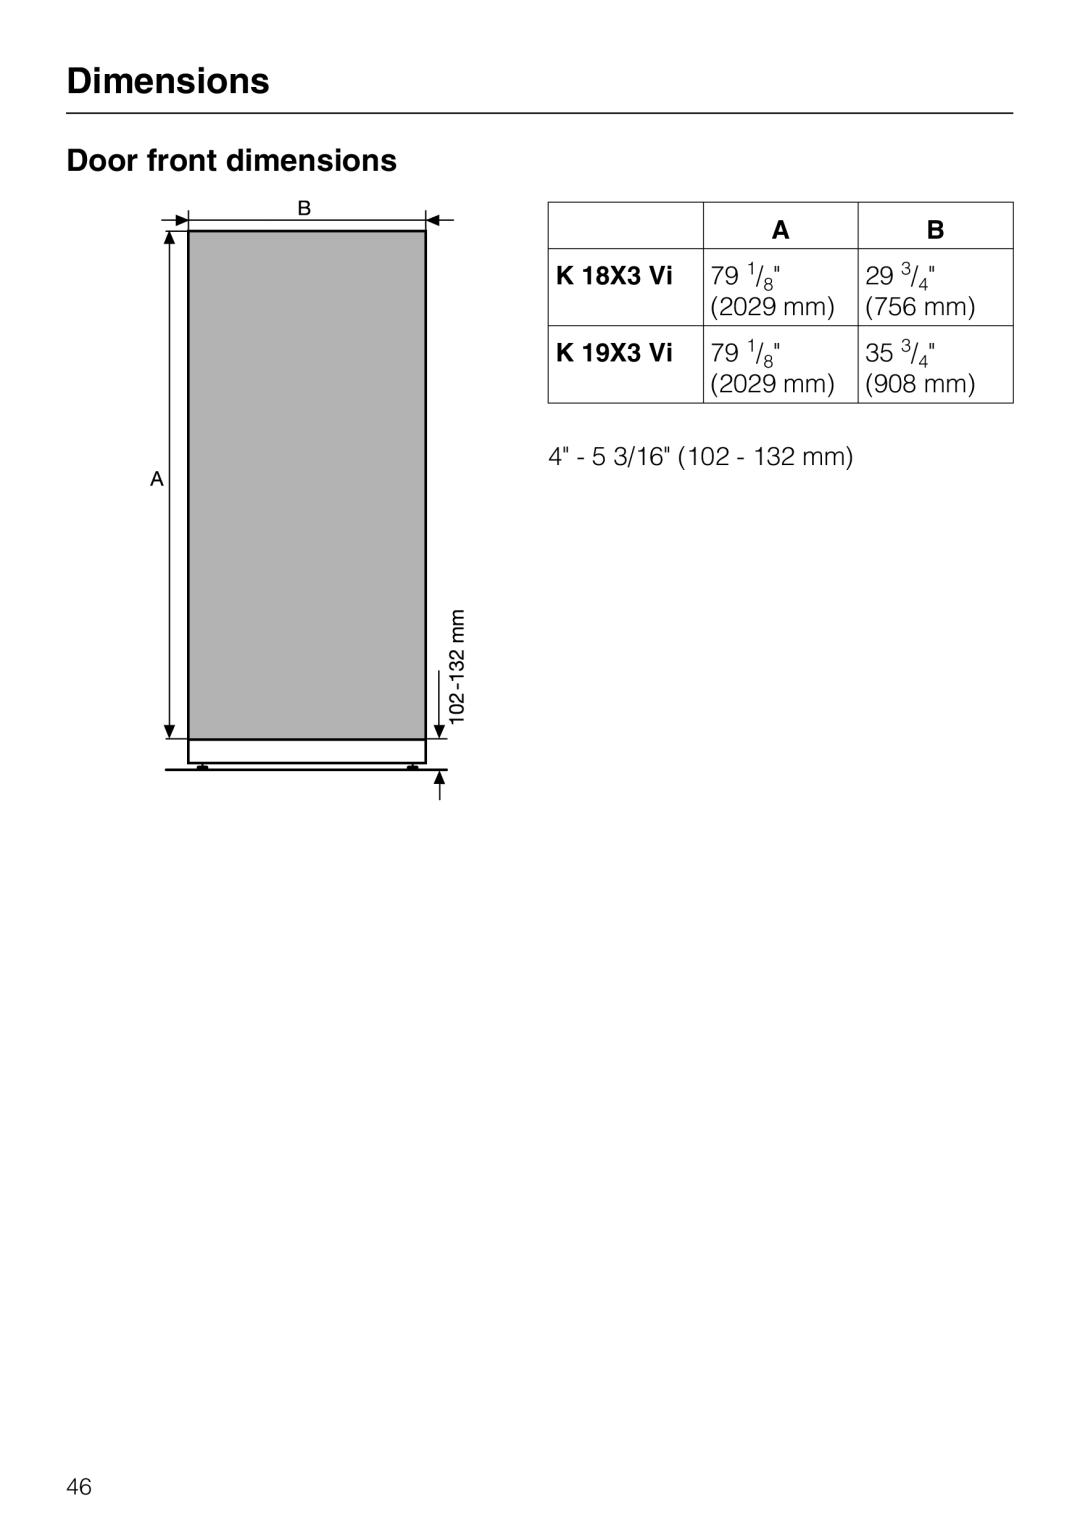 Miele 09 920 570 Door front dimensions, Dimensions, 2029 mm, 756 mm, 908 mm, 4 - 5 3/16 102 - 132 mm 